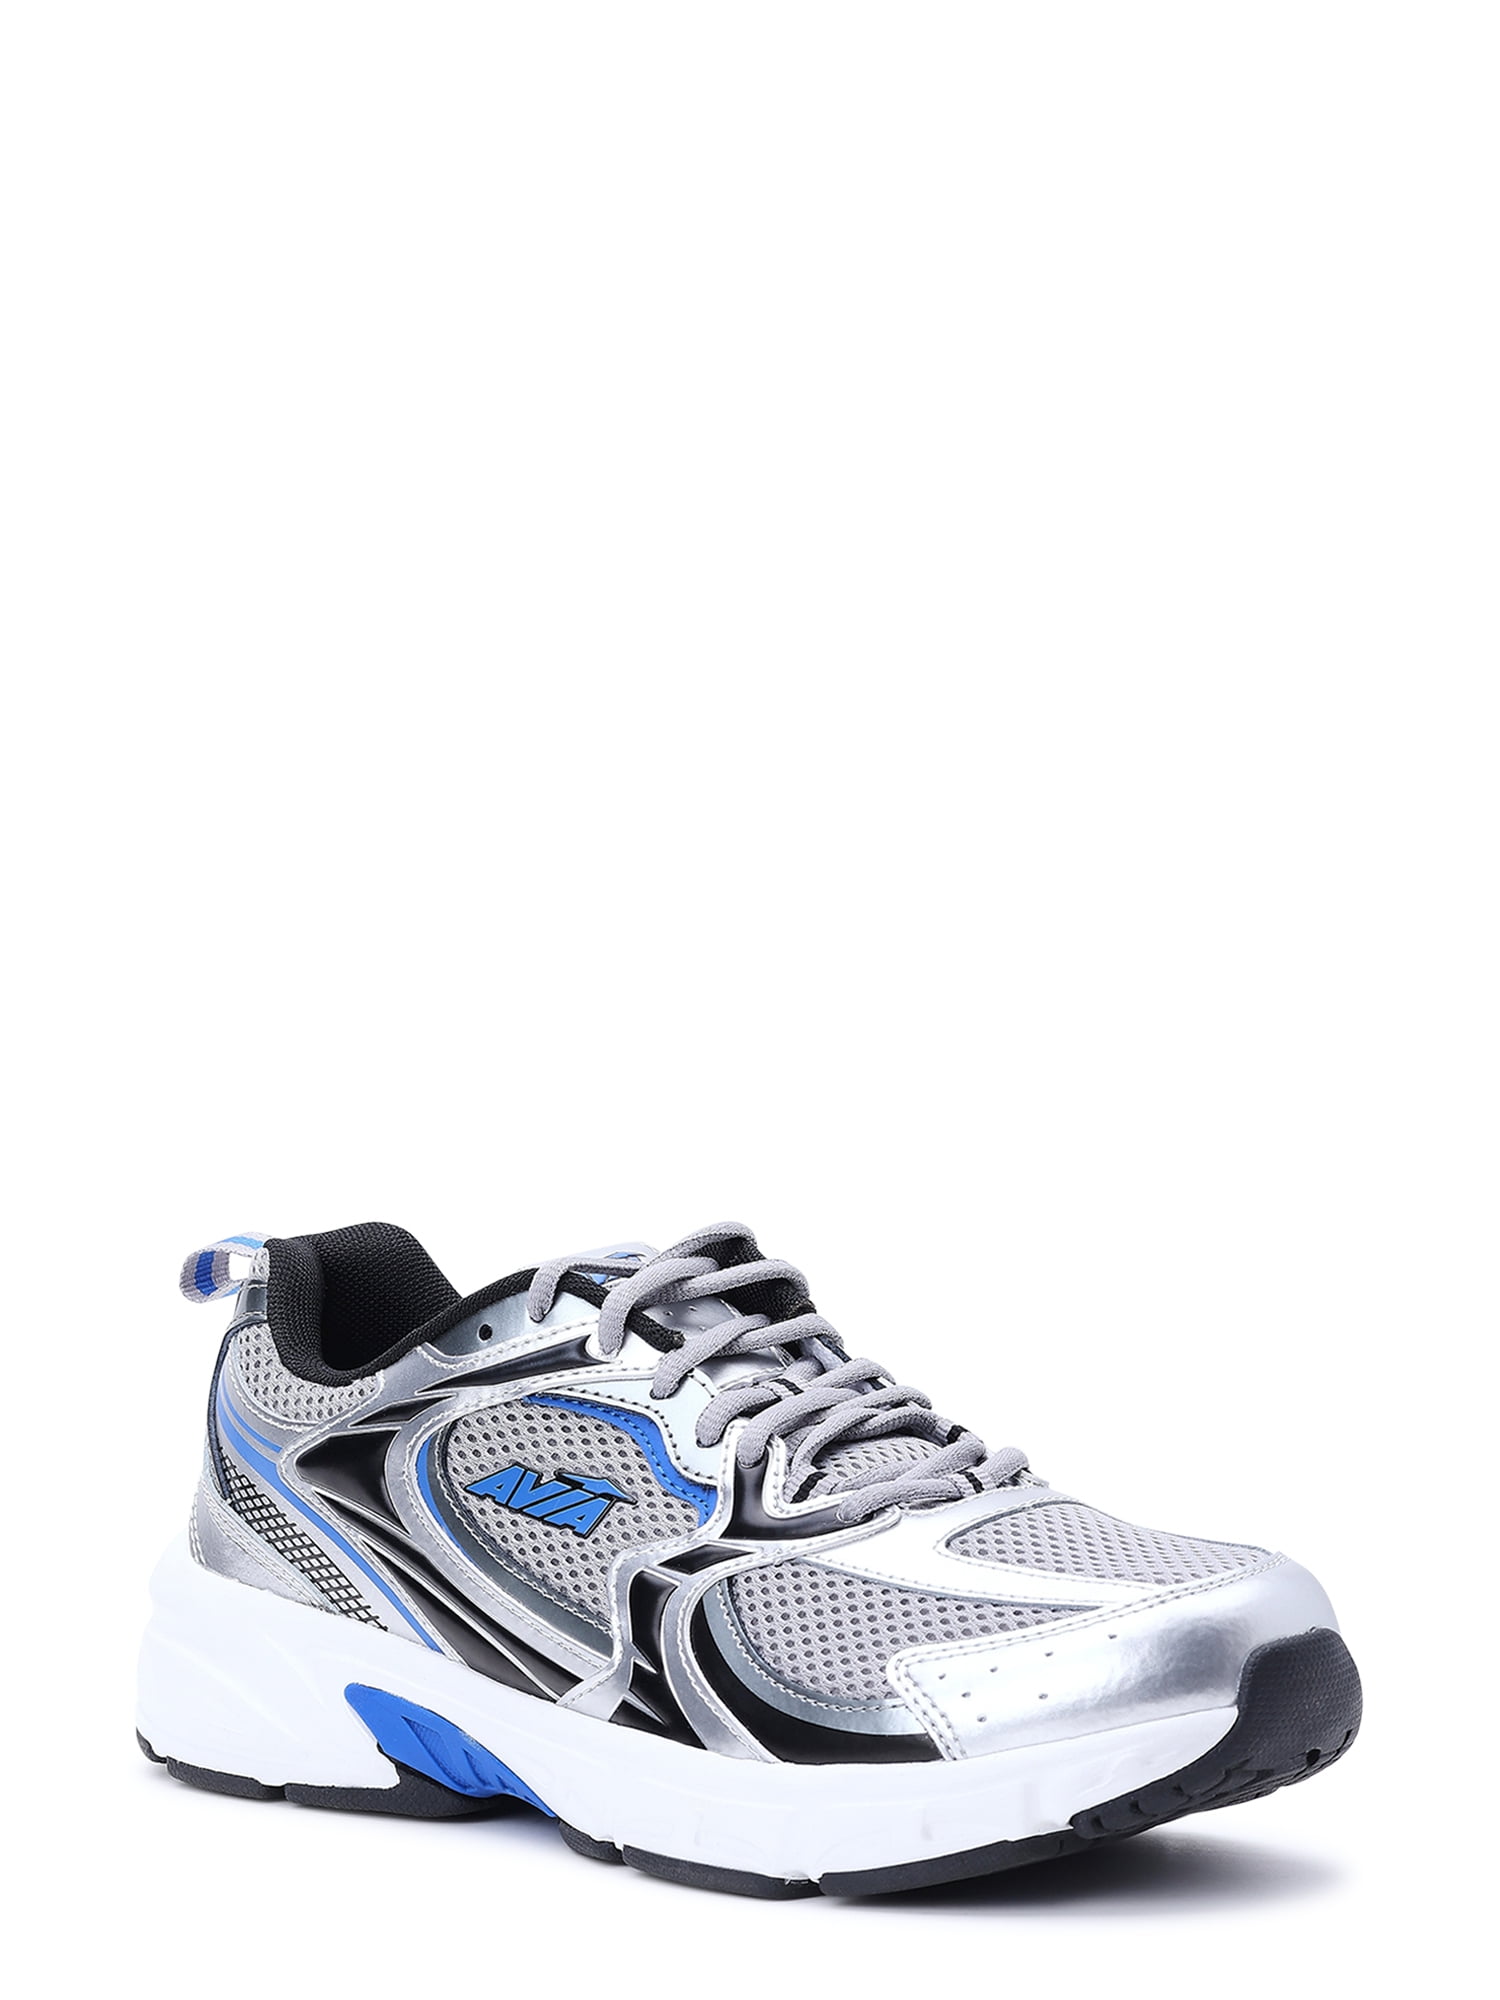 Avia Men's 5000 Athletic Performance Running Shoes (Wide Width